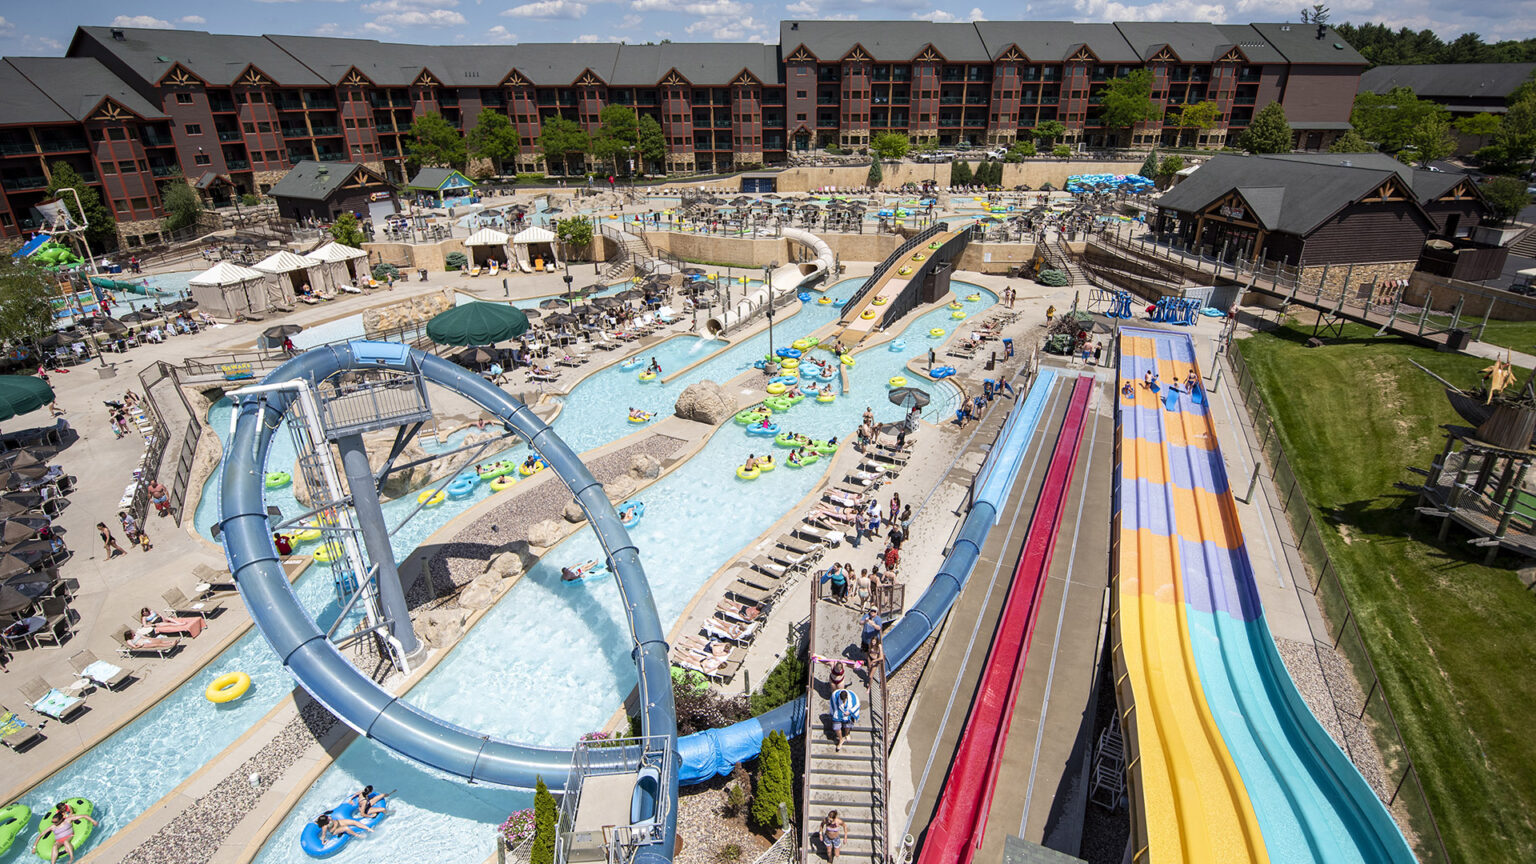 Tourists go down waterslides and float on tubes in a lazy river in an outdoor waterpark, with multistory hotel buildings in the background.